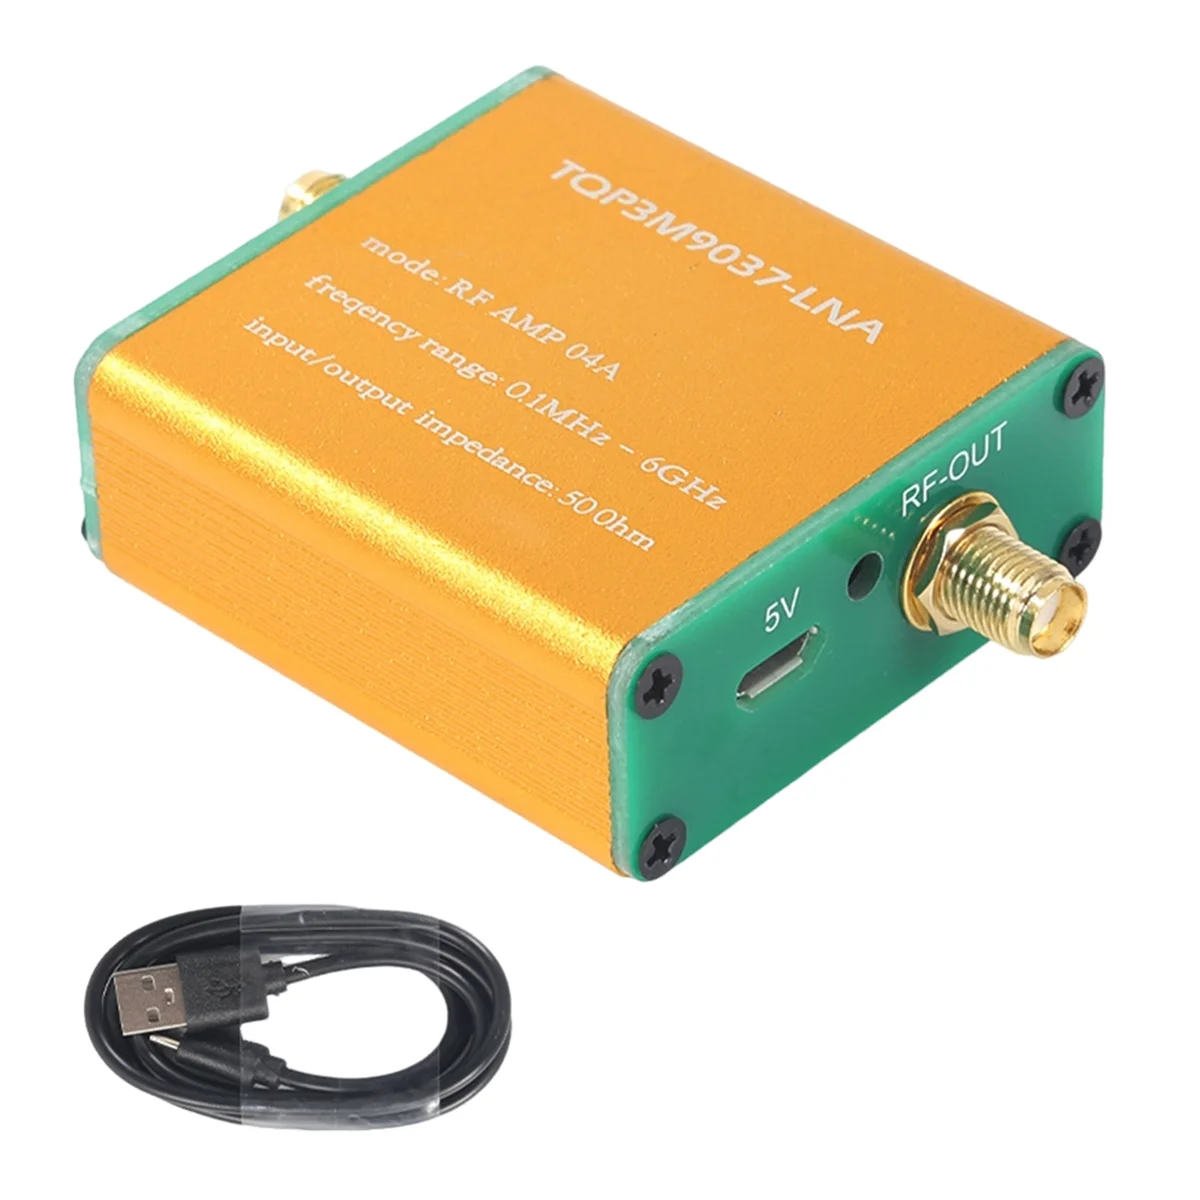 

Low Noise Amplifier 100K-6GHz Full Band 20DB LNA RF Power Preamplifier Professional with Battery